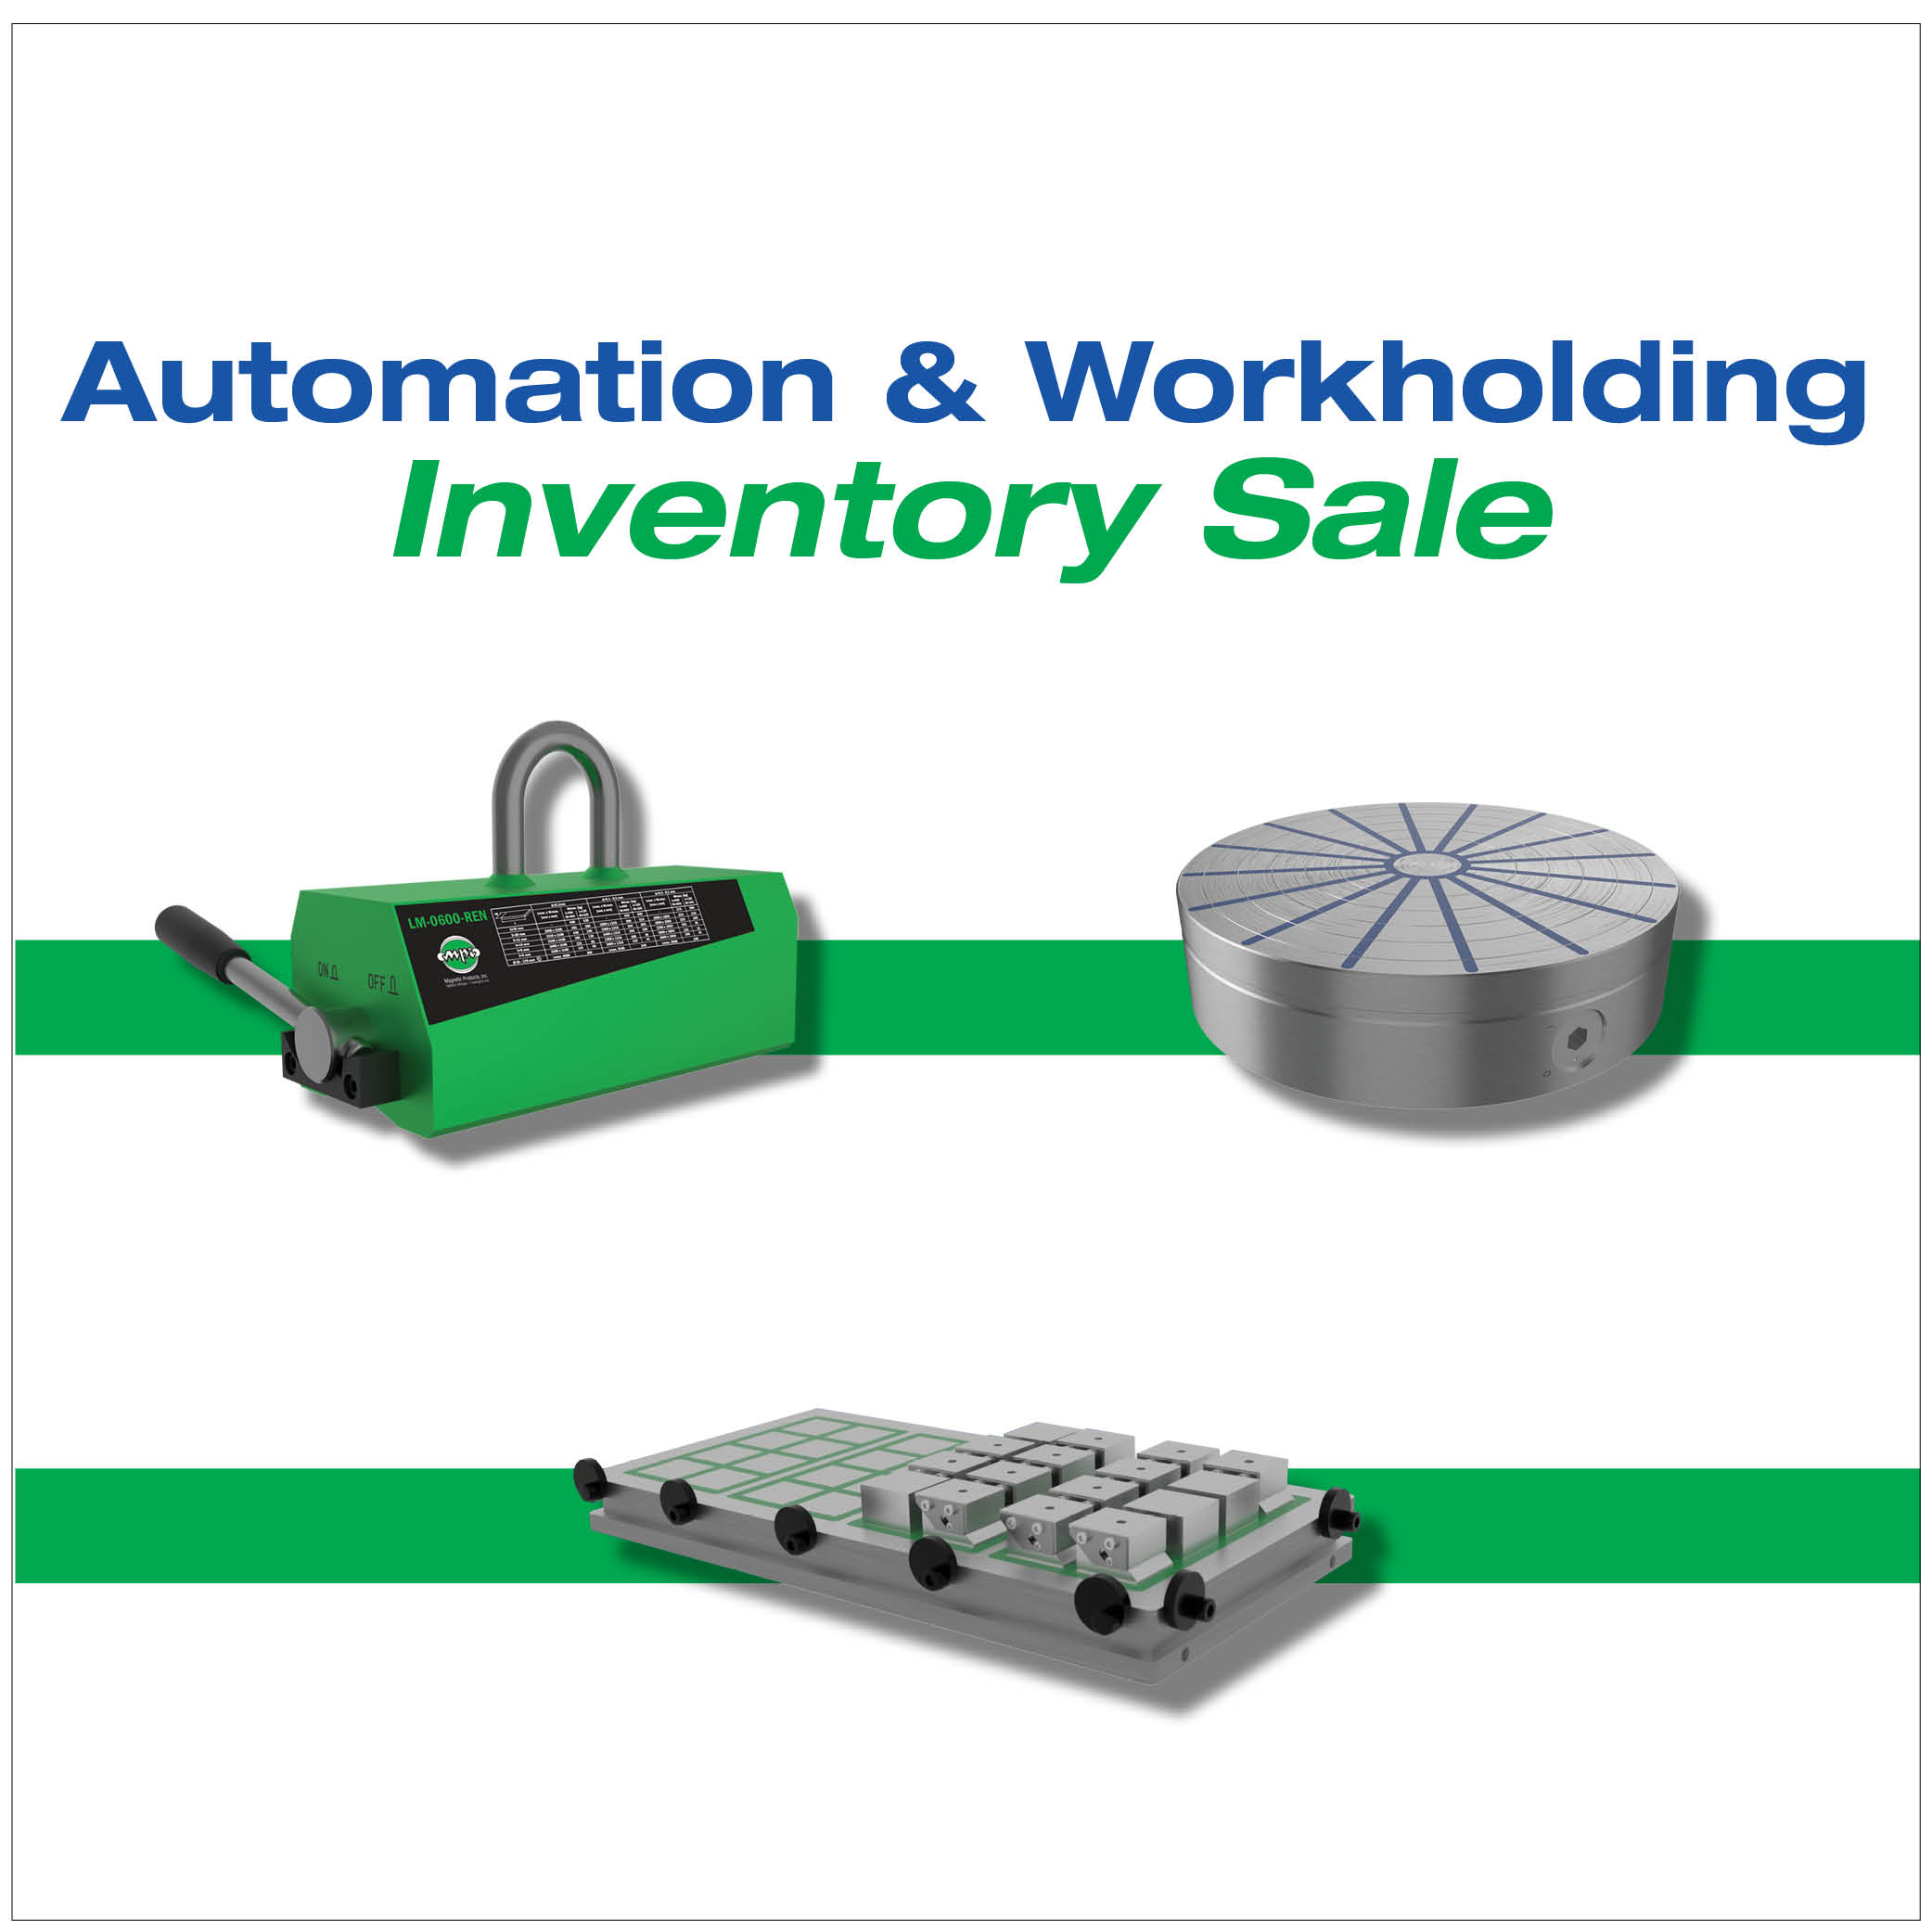 Automation and Workholding Sale image